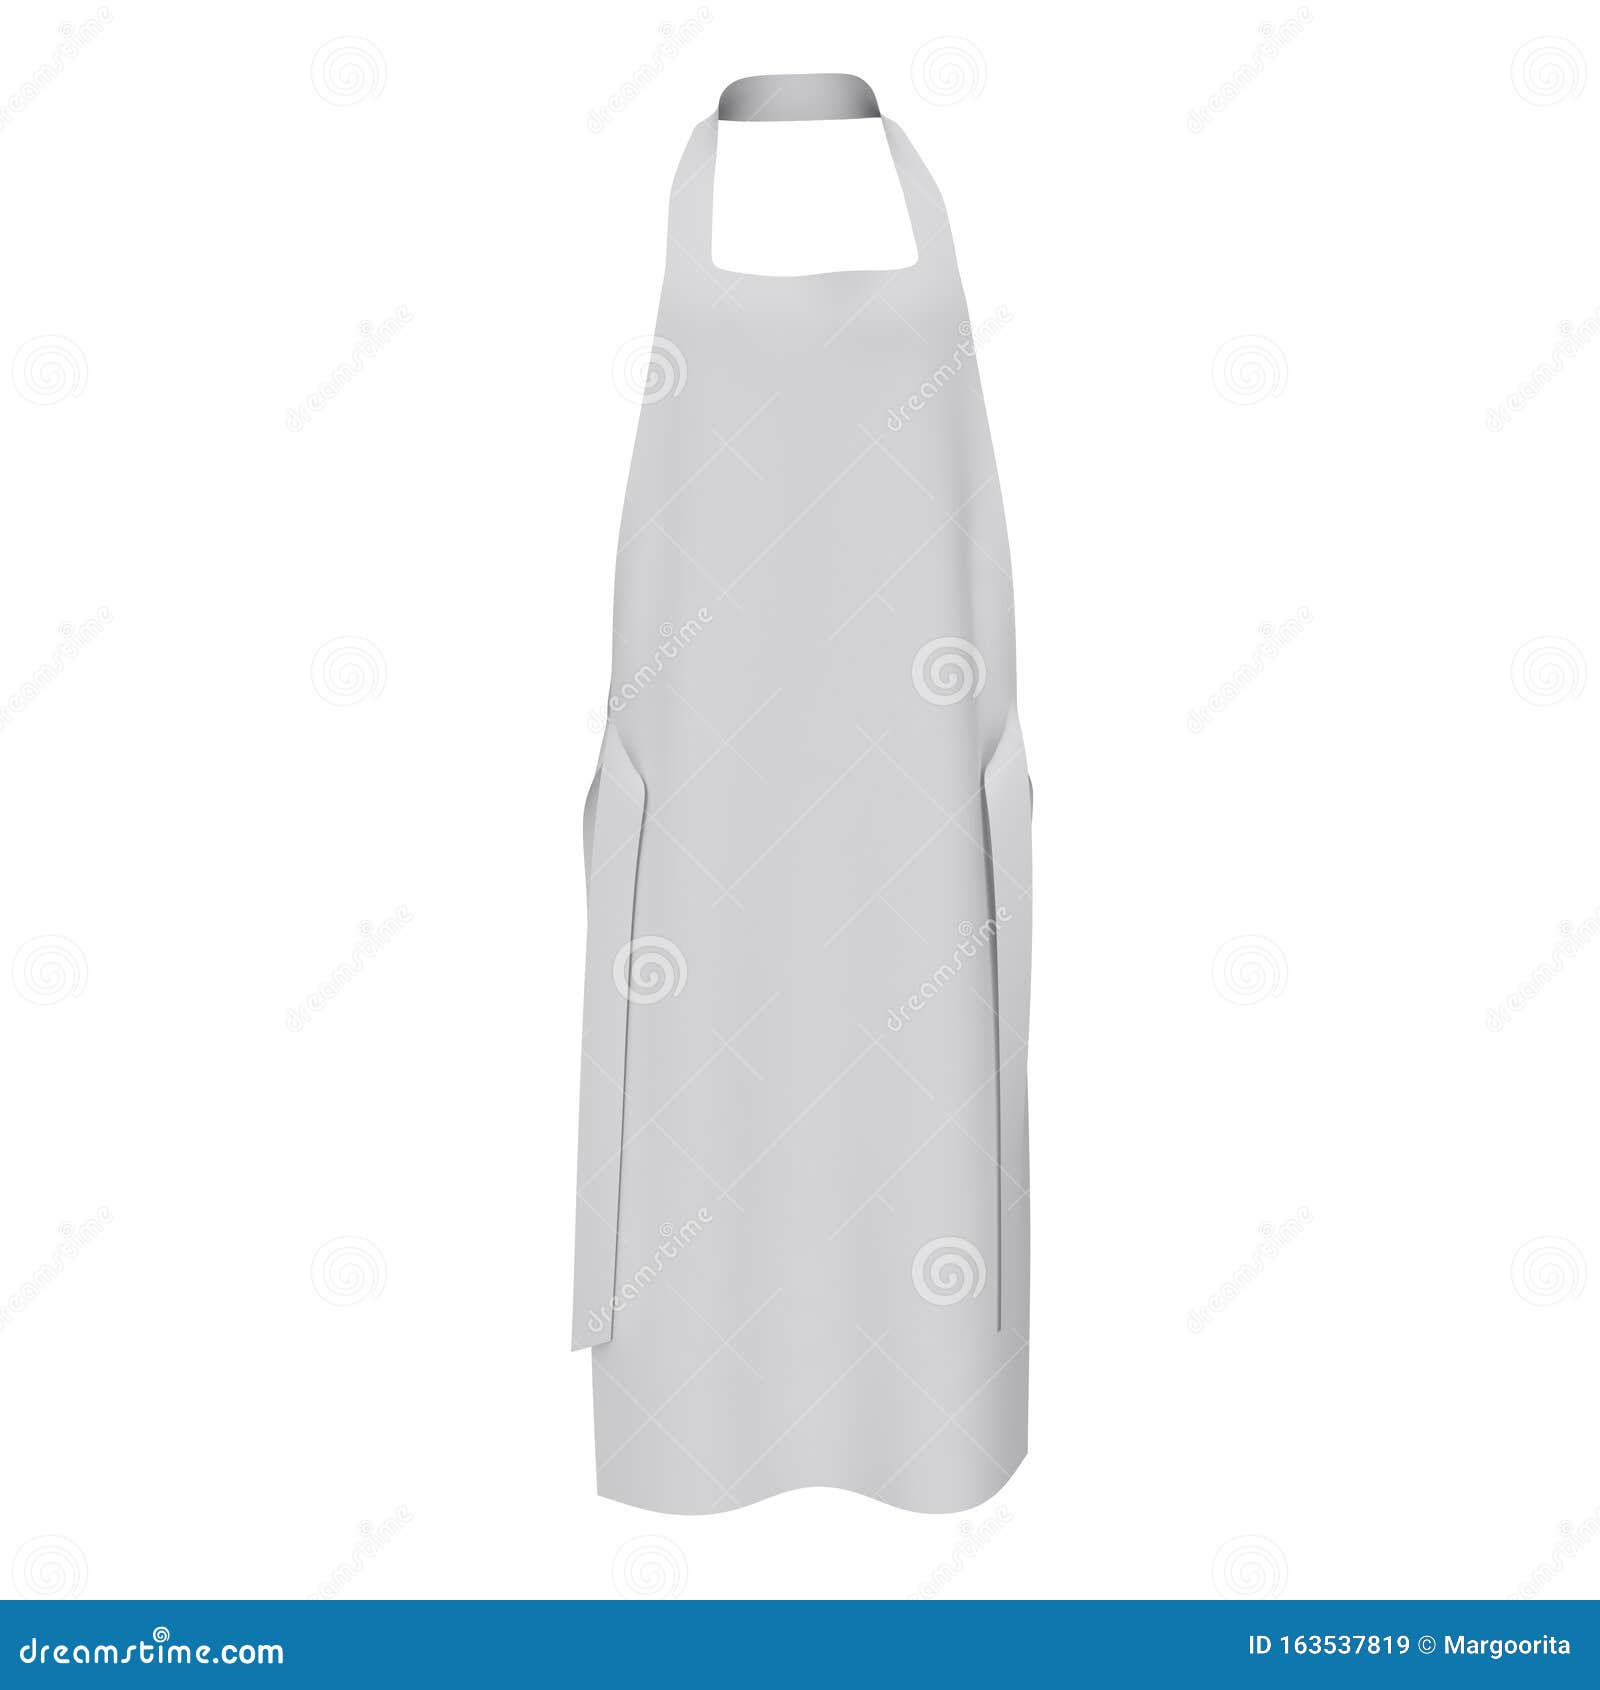 Download Mockup Apron Isolated On White Background. 3d Rendering ...